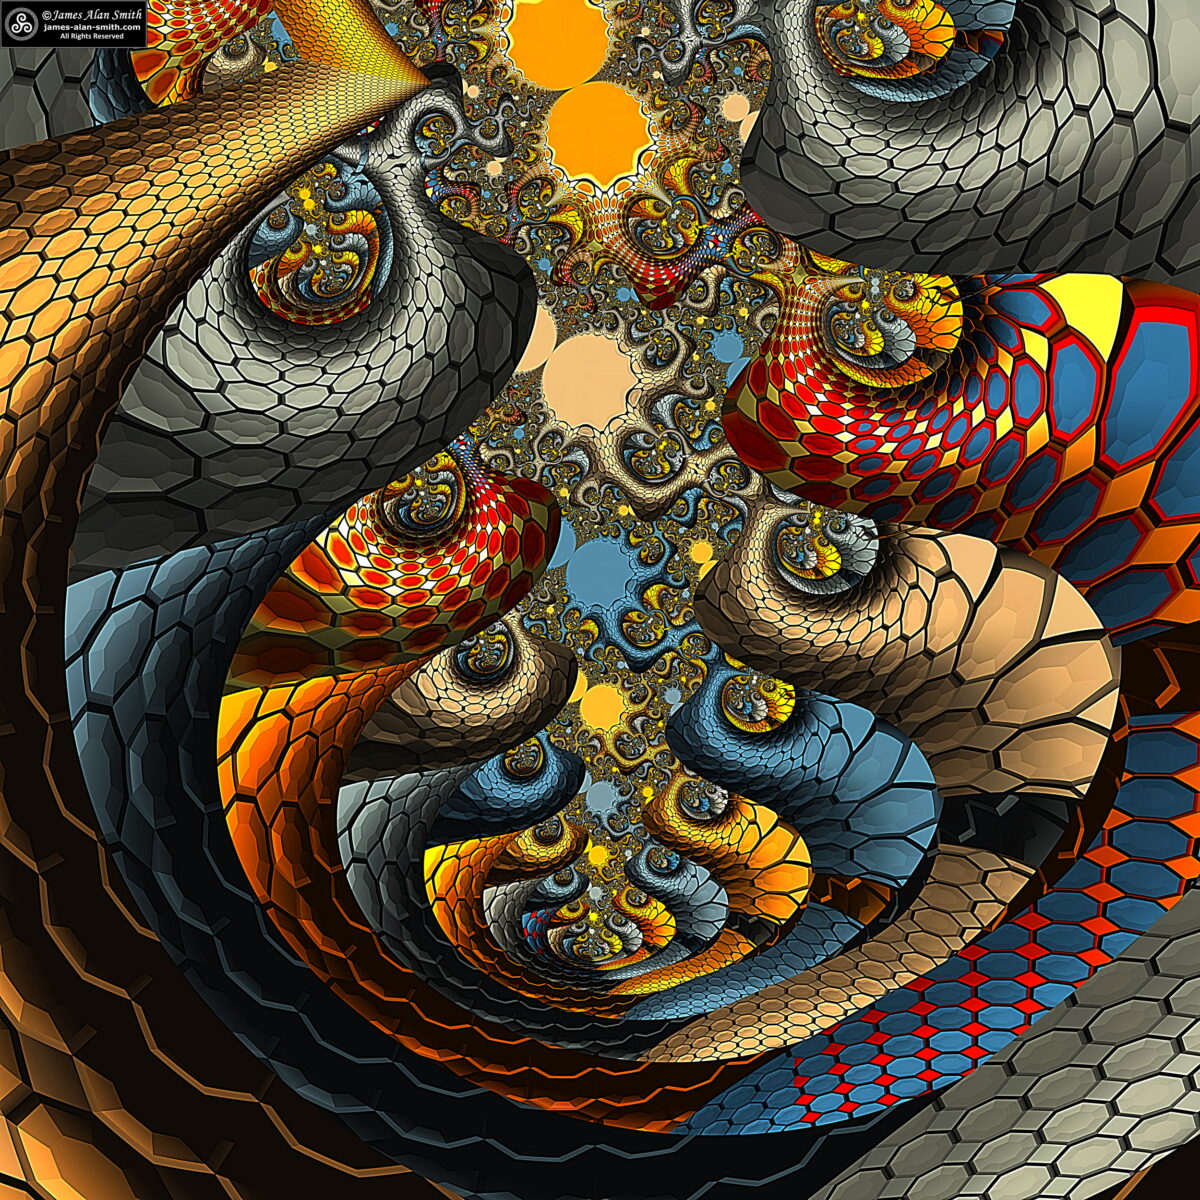 Fractal Tunnels: Artwork by James Alan Smith